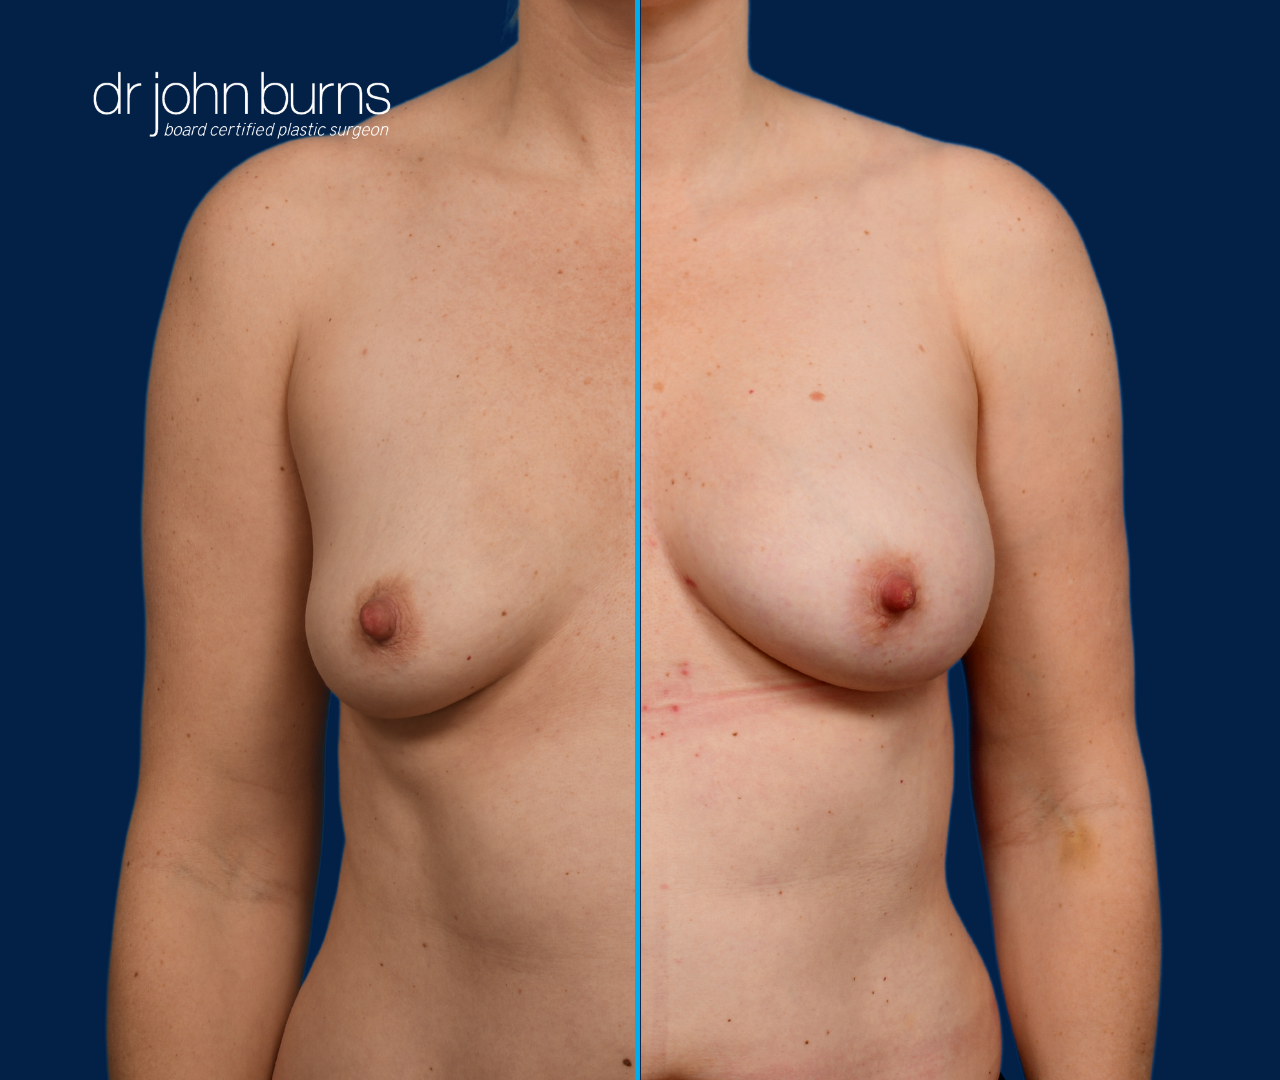 case 15- split screen before & after fat transfer to breast by top plastic surgeon, Dr. John Burns